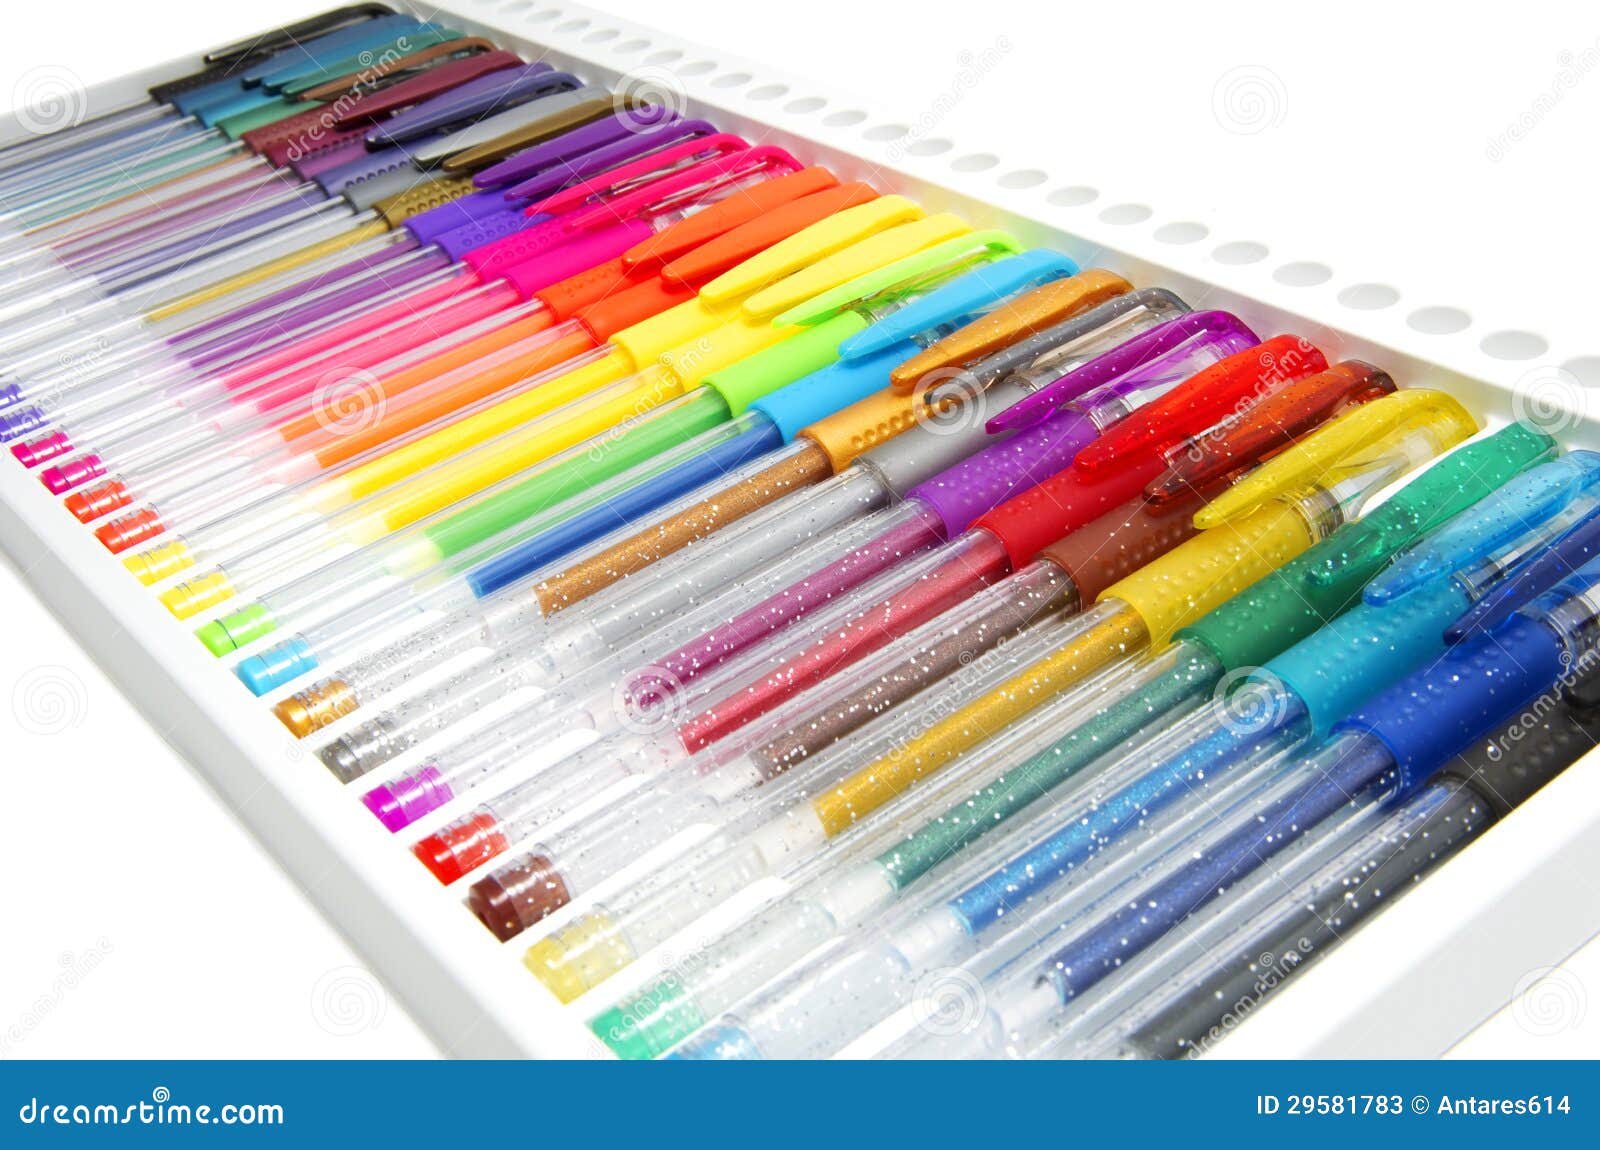 Color Pens Stock Photos Image 29581783 Coloring Wallpapers Download Free Images Wallpaper [coloring436.blogspot.com]